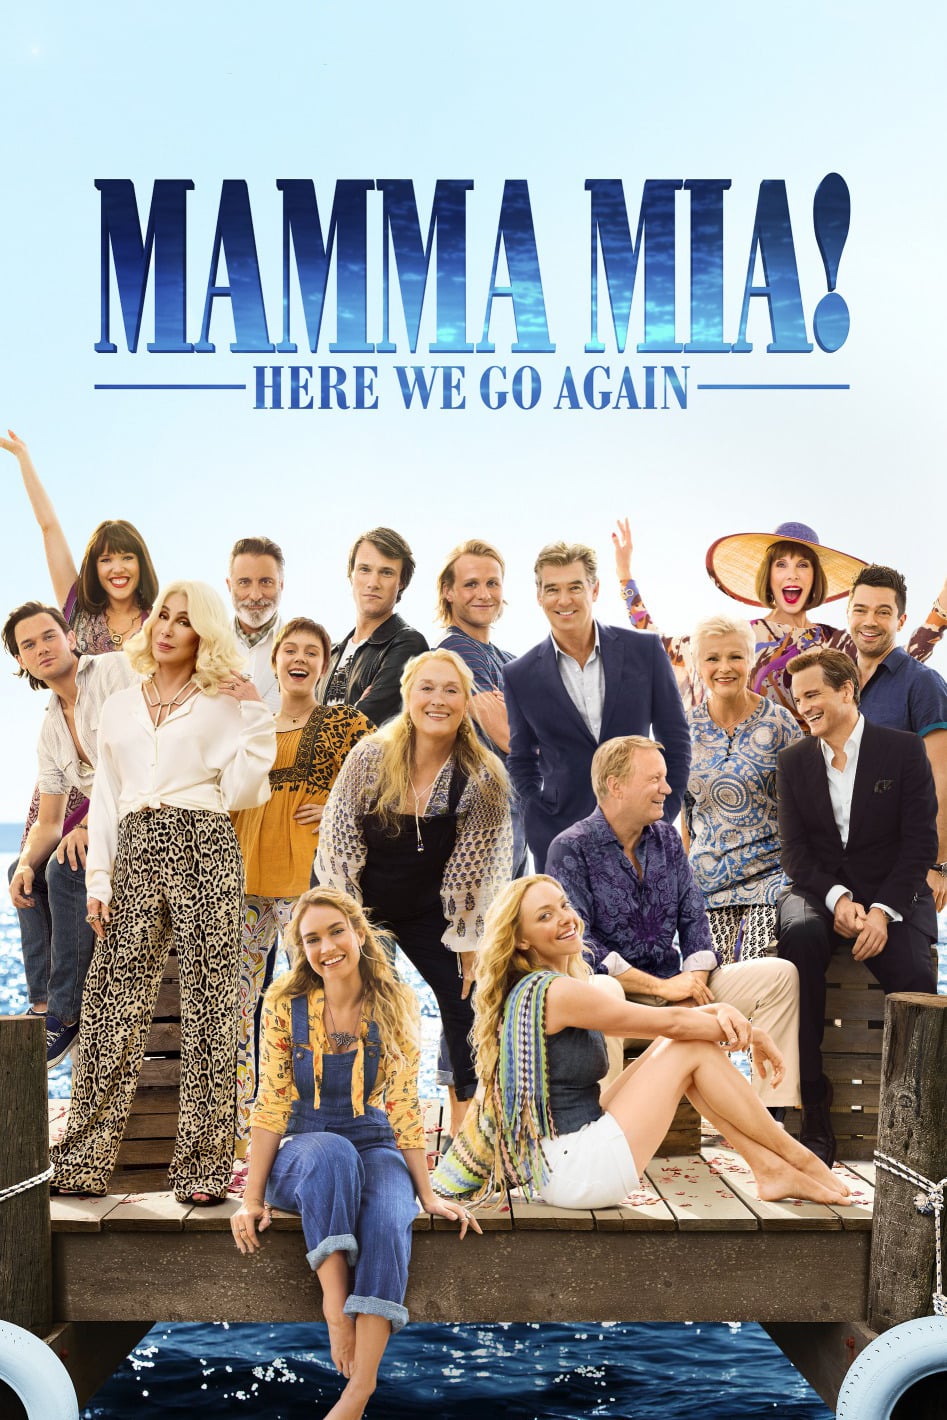 Poster for the movie "Mamma Mia! Here We Go Again"